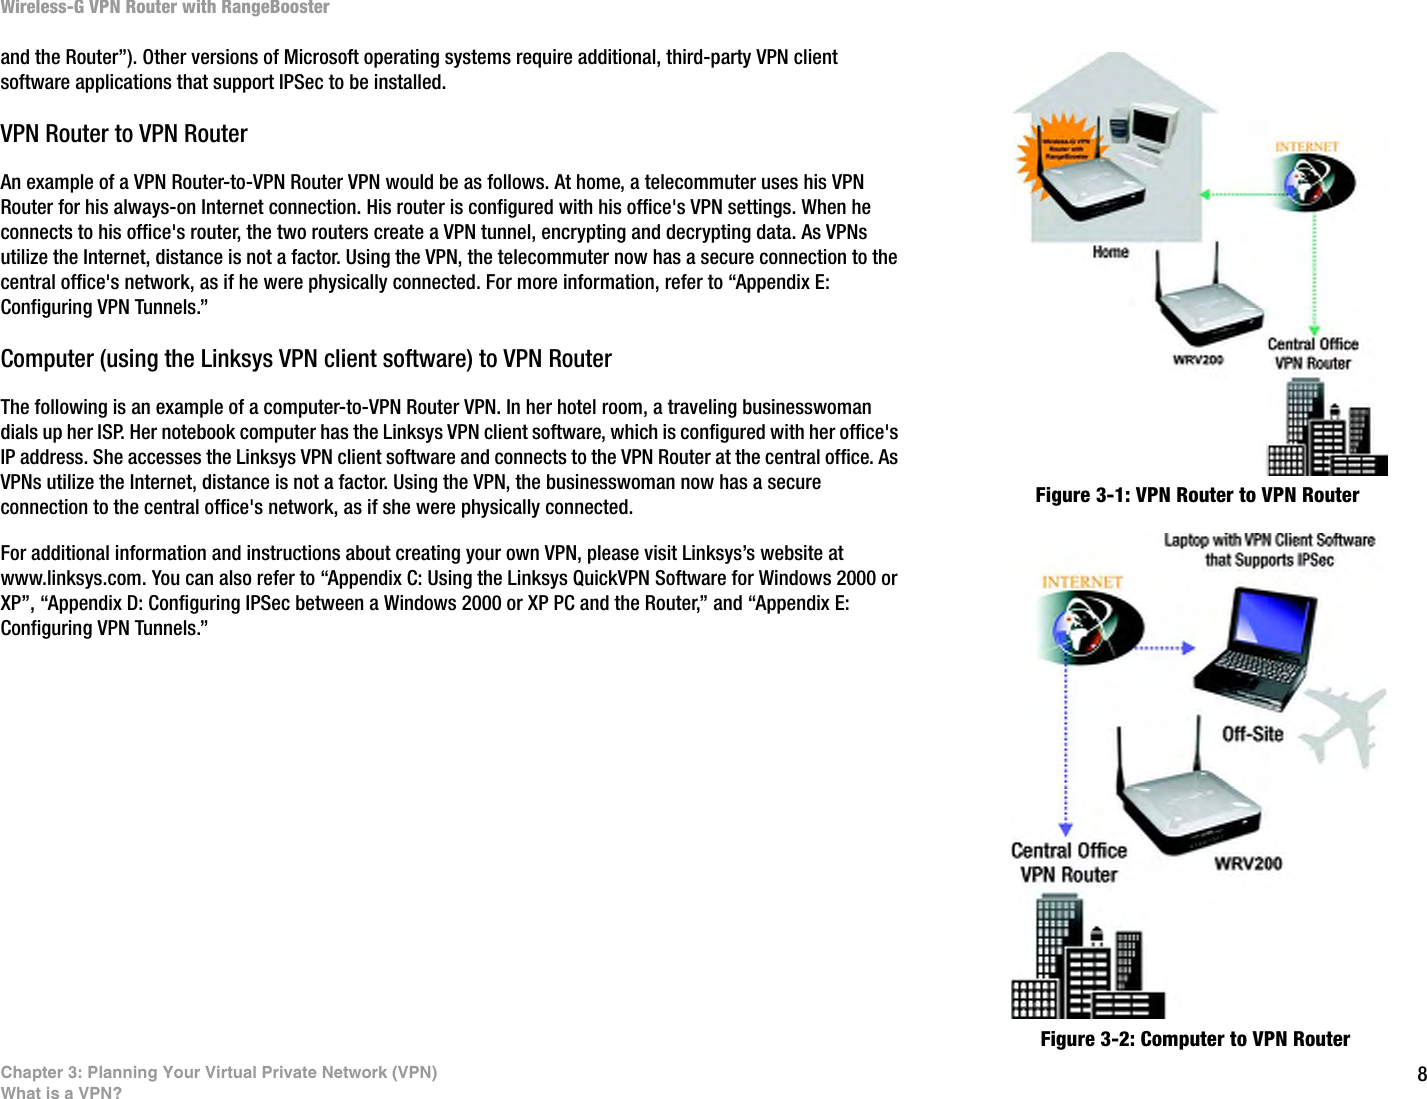 8Chapter 3: Planning Your Virtual Private Network (VPN)What is a VPN?Wireless-G VPN Router with RangeBoosterand the Router”). Other versions of Microsoft operating systems require additional, third-party VPN client software applications that support IPSec to be installed. VPN Router to VPN RouterAn example of a VPN Router-to-VPN Router VPN would be as follows. At home, a telecommuter uses his VPN Router for his always-on Internet connection. His router is configured with his office&apos;s VPN settings. When he connects to his office&apos;s router, the two routers create a VPN tunnel, encrypting and decrypting data. As VPNs utilize the Internet, distance is not a factor. Using the VPN, the telecommuter now has a secure connection to the central office&apos;s network, as if he were physically connected. For more information, refer to “Appendix E: Configuring VPN Tunnels.”Computer (using the Linksys VPN client software) to VPN RouterThe following is an example of a computer-to-VPN Router VPN. In her hotel room, a traveling businesswoman dials up her ISP. Her notebook computer has the Linksys VPN client software, which is configured with her office&apos;s IP address. She accesses the Linksys VPN client software and connects to the VPN Router at the central office. As VPNs utilize the Internet, distance is not a factor. Using the VPN, the businesswoman now has a secure connection to the central office&apos;s network, as if she were physically connected.For additional information and instructions about creating your own VPN, please visit Linksys’s website at www.linksys.com. You can also refer to “Appendix C: Using the Linksys QuickVPN Software for Windows 2000 or XP”, “Appendix D: Configuring IPSec between a Windows 2000 or XP PC and the Router,” and “Appendix E: Configuring VPN Tunnels.”Figure 3-1: VPN Router to VPN RouterFigure 3-2: Computer to VPN Router